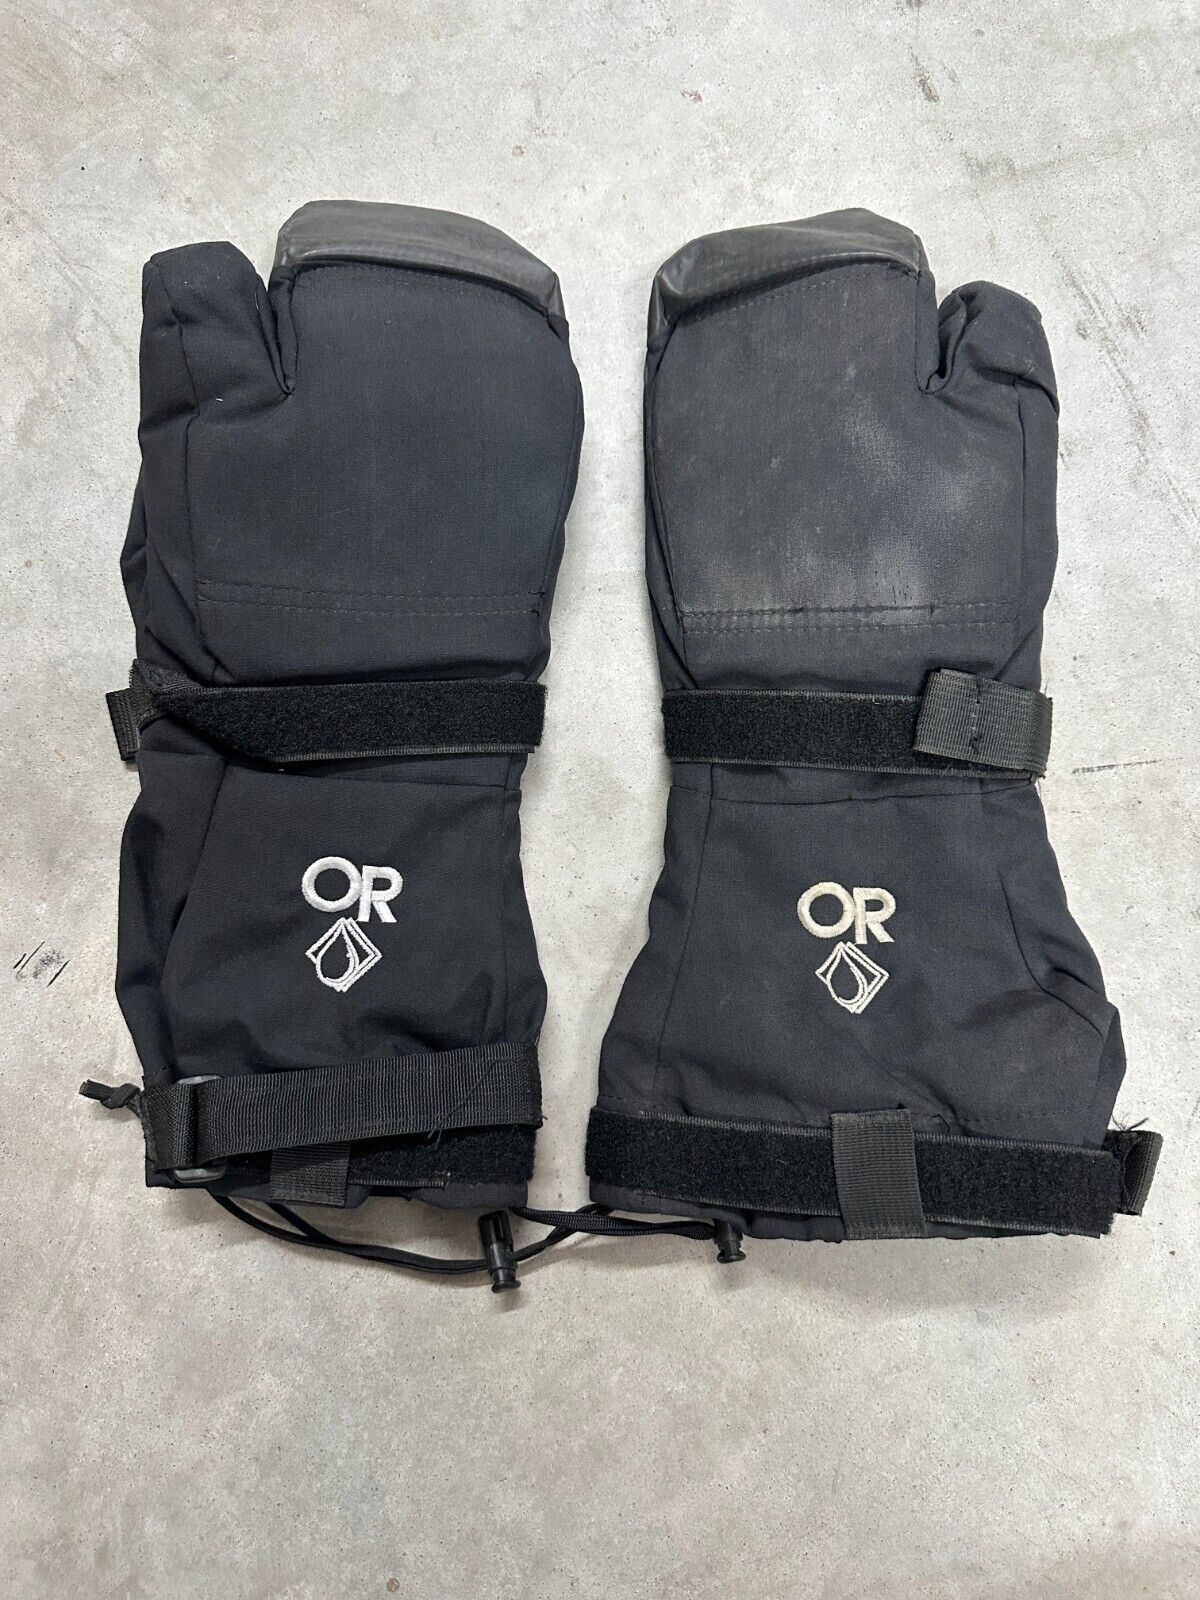 Large - Outdoor Research Mittens Extreme Cold Weather Gloves Happy USMC Black